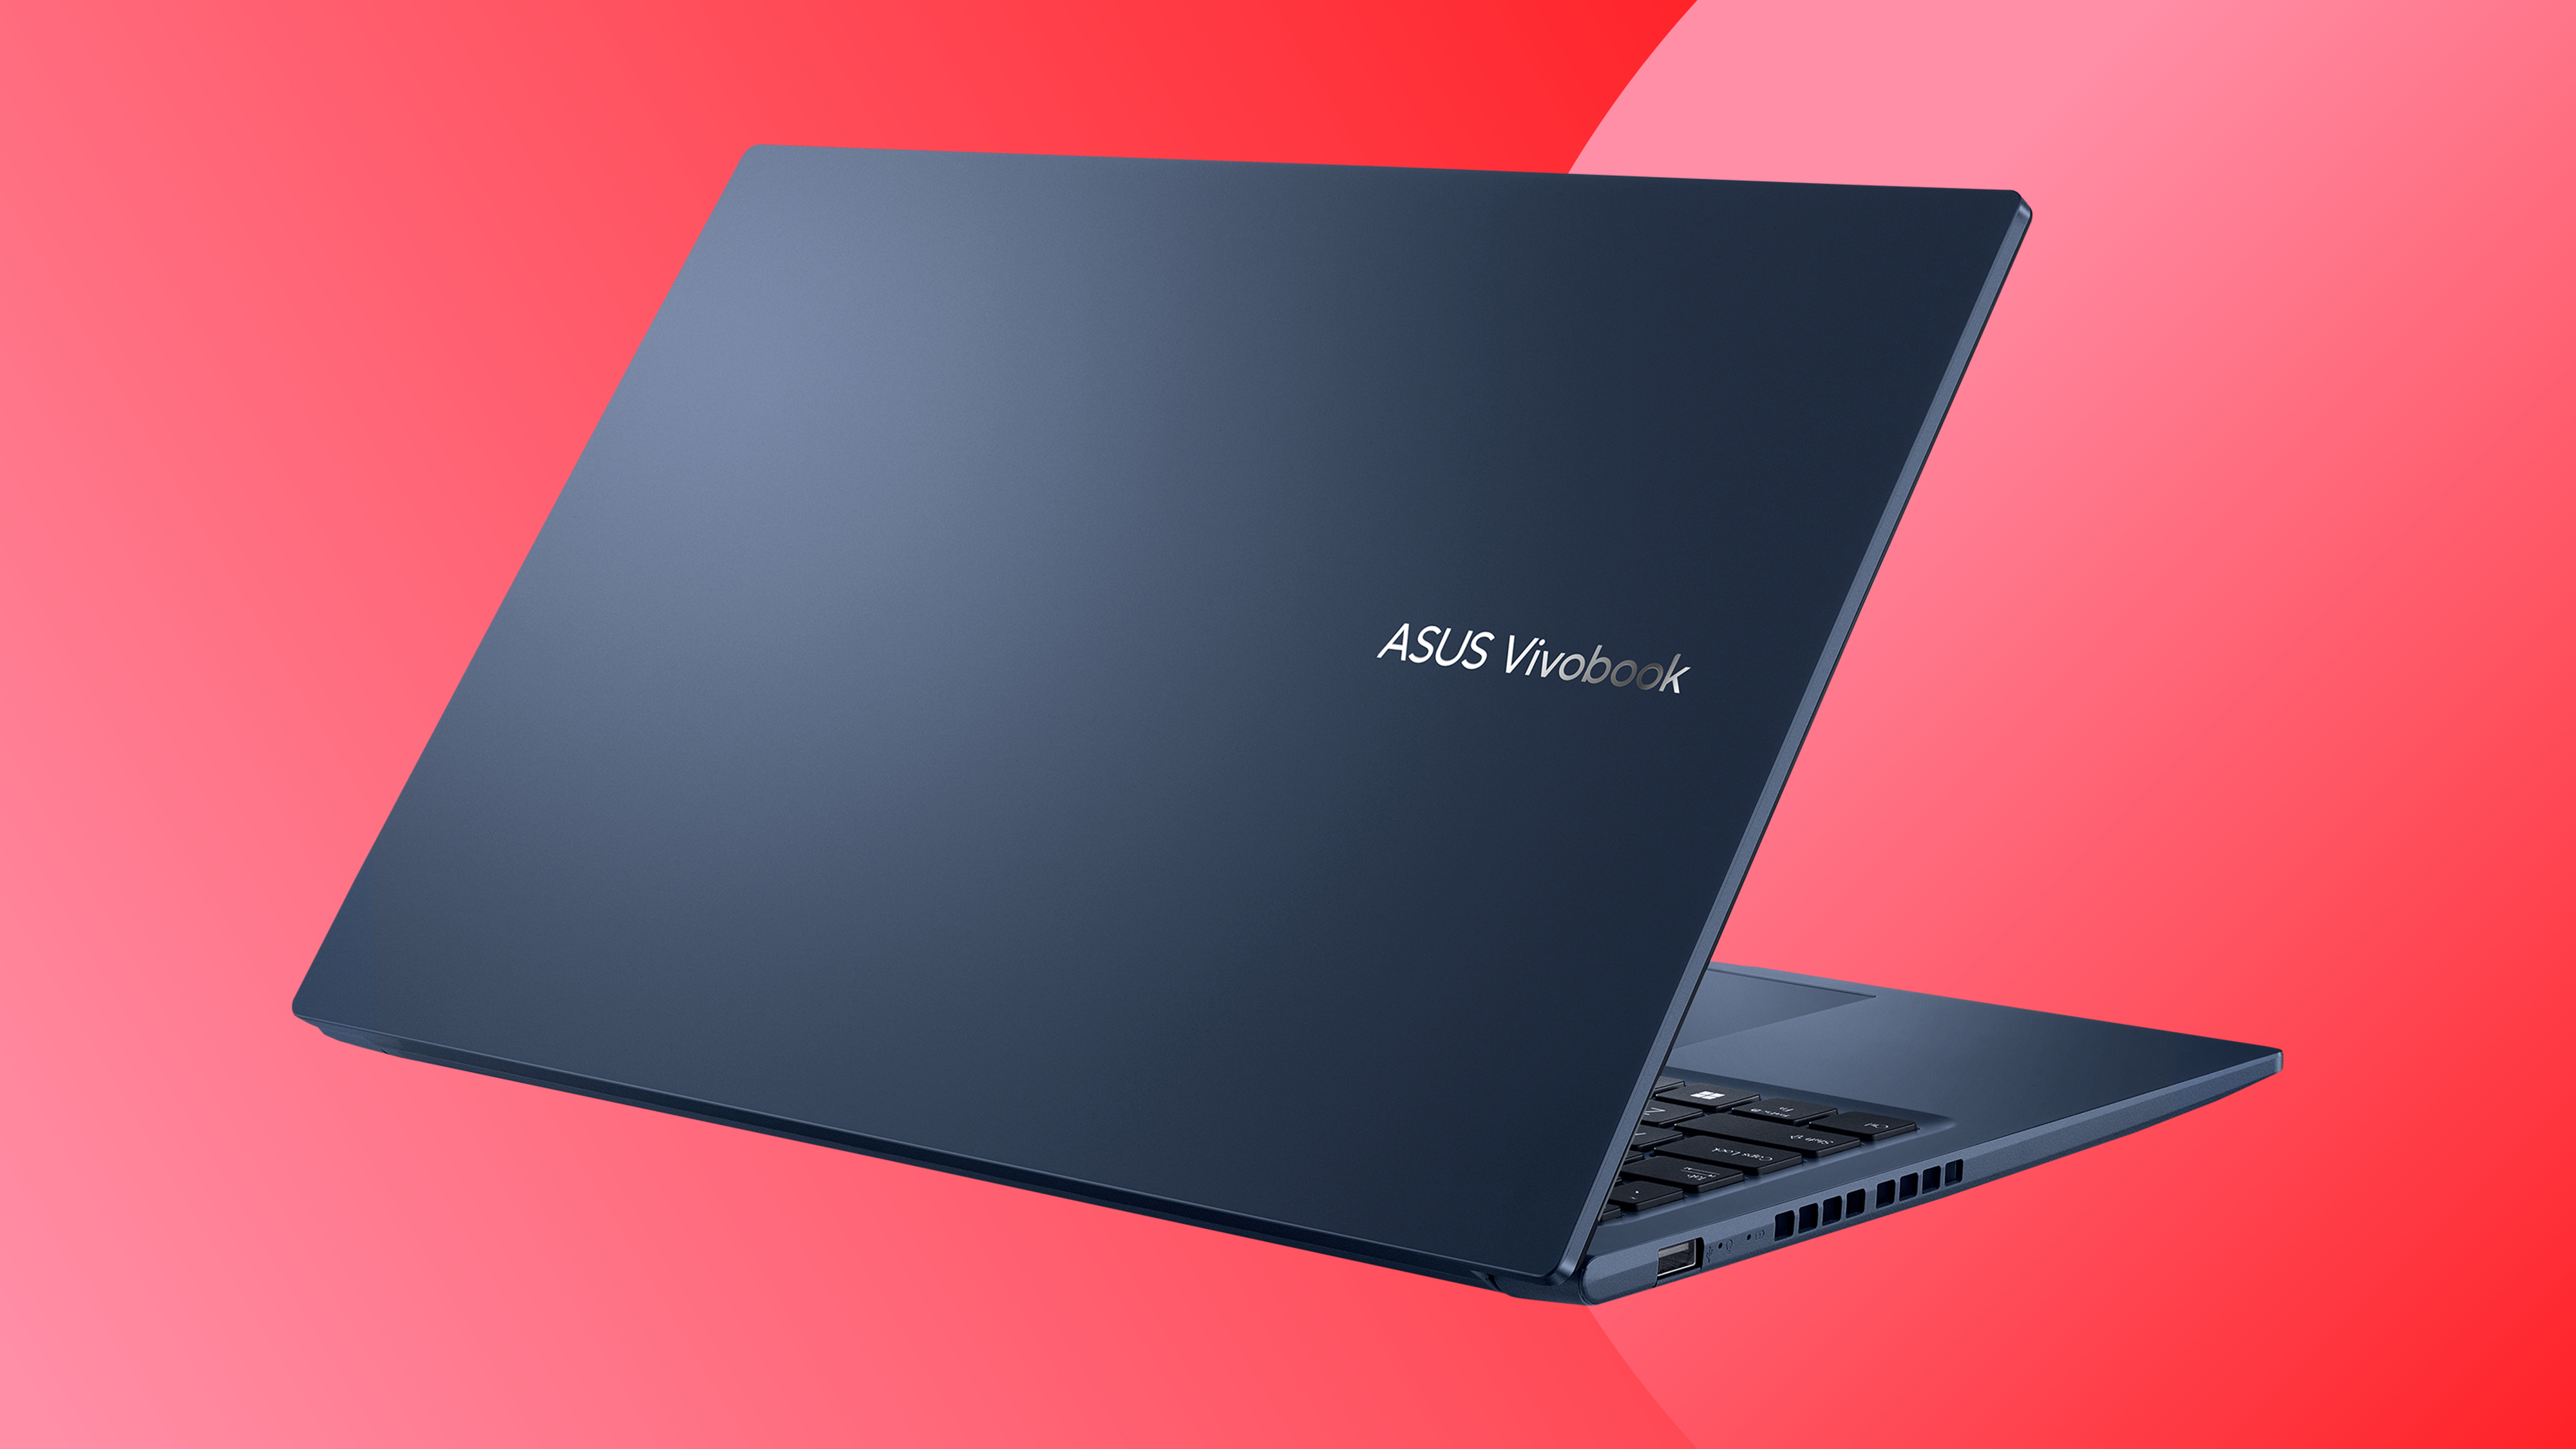 ASUS Black Friday deal with image of ASUS Vivobook 15 on a red background